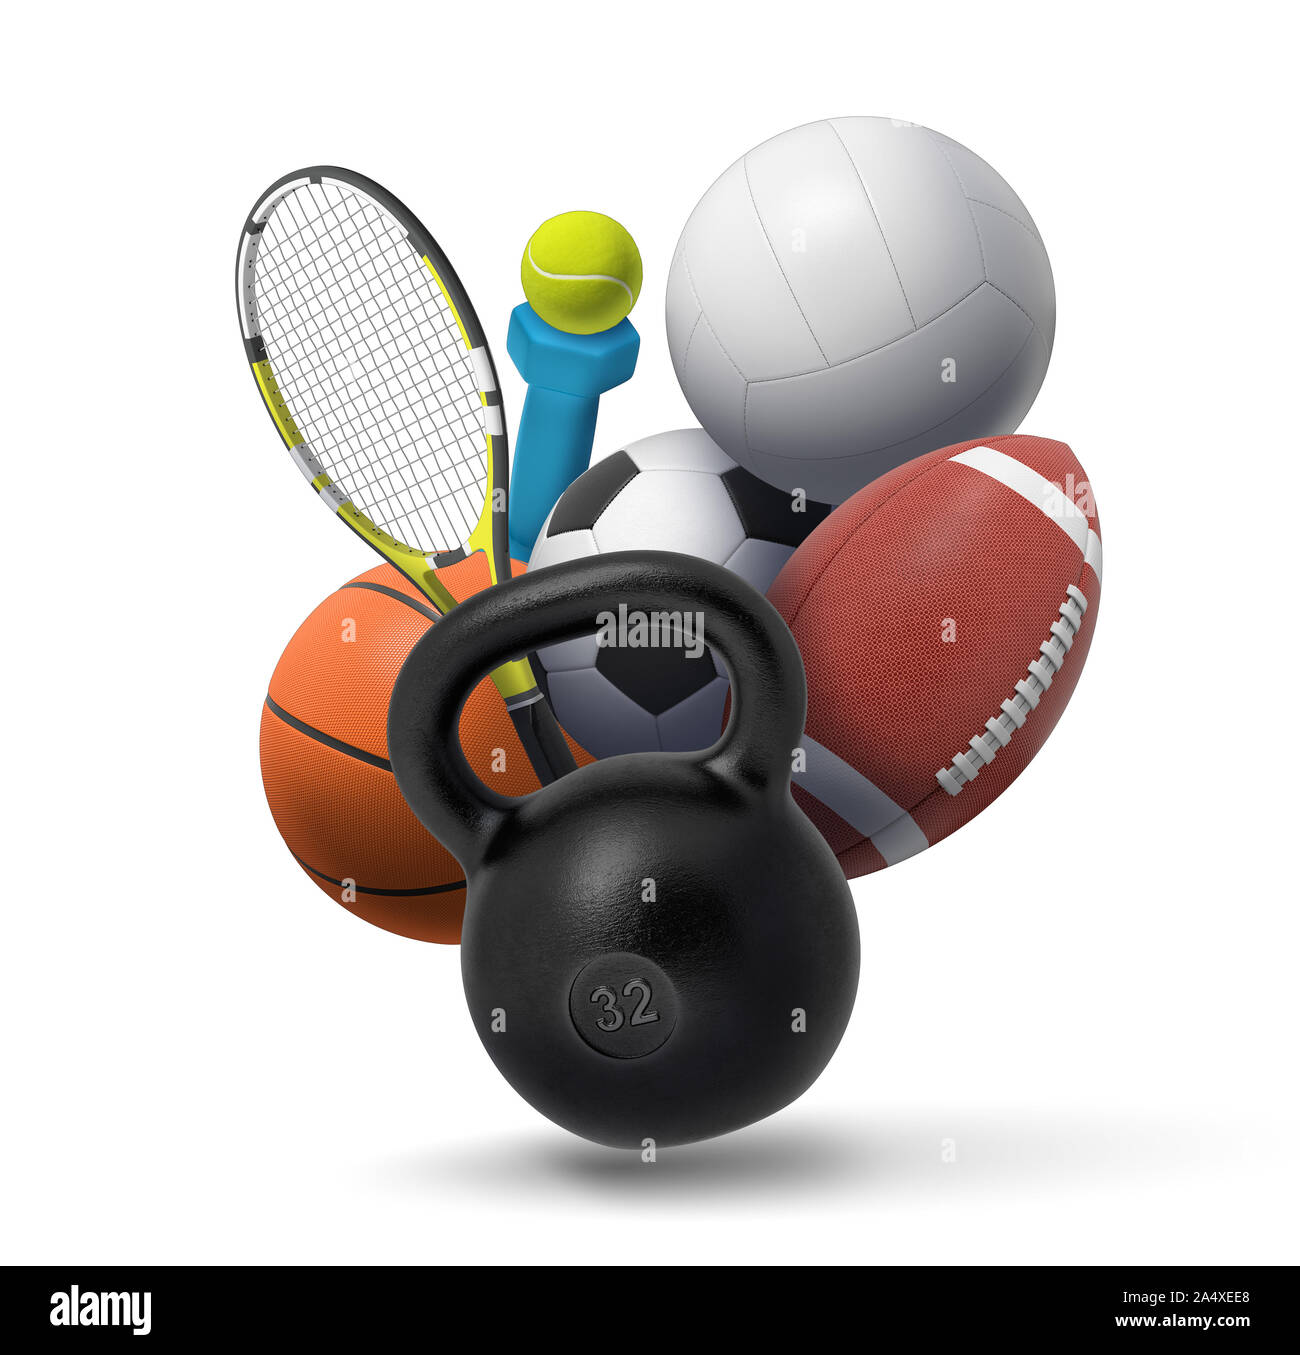 3d rendering of collection of sport and fitness equipment: a dumbbell, a  kettlebell, tennis gear, and several team sport balls Stock Photo - Alamy